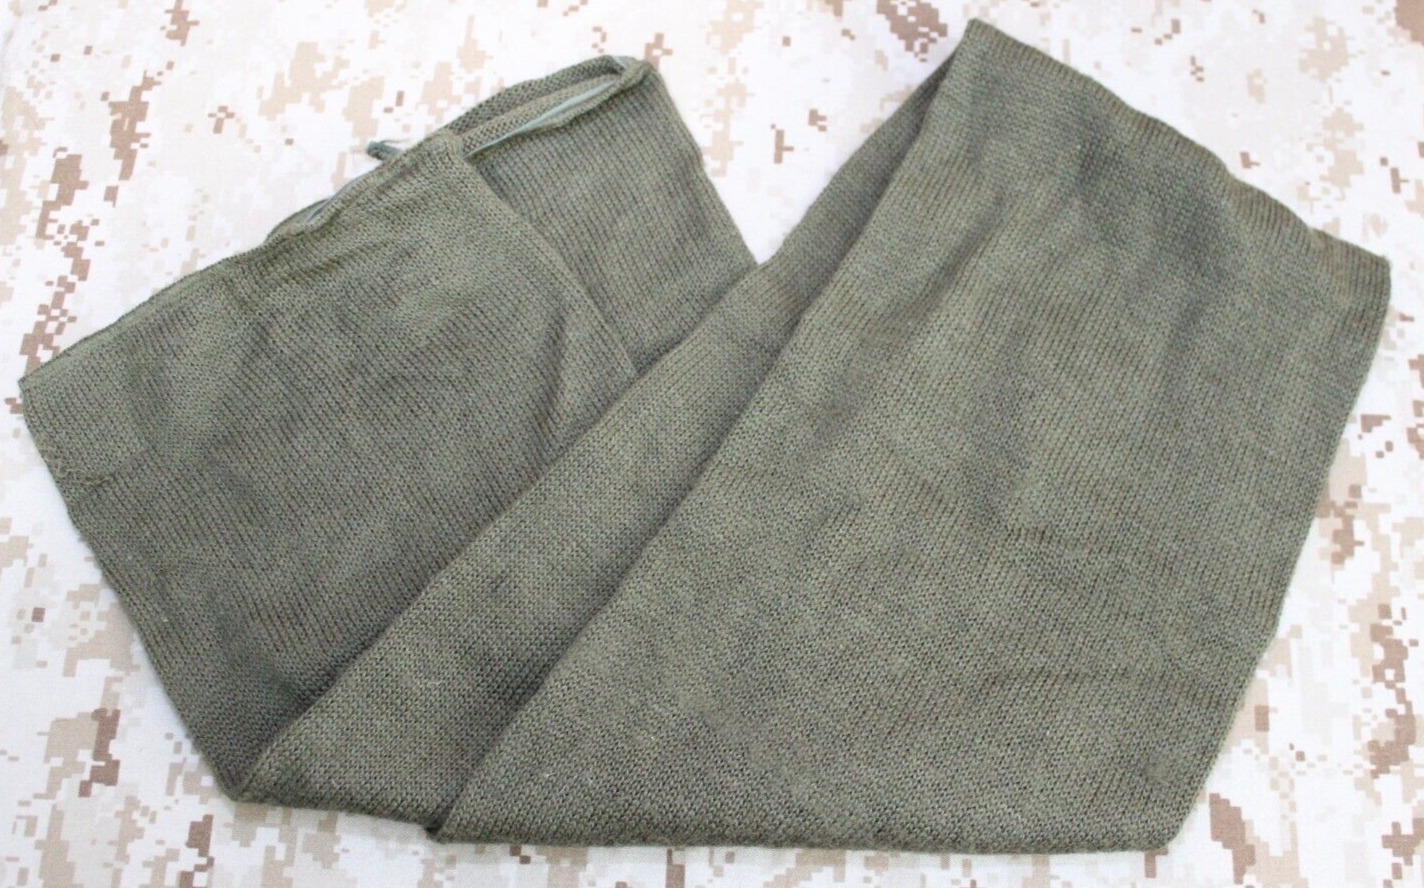 Military Issue Tactical Scarf Neck Warmer 100% Wool Olive Drab Green